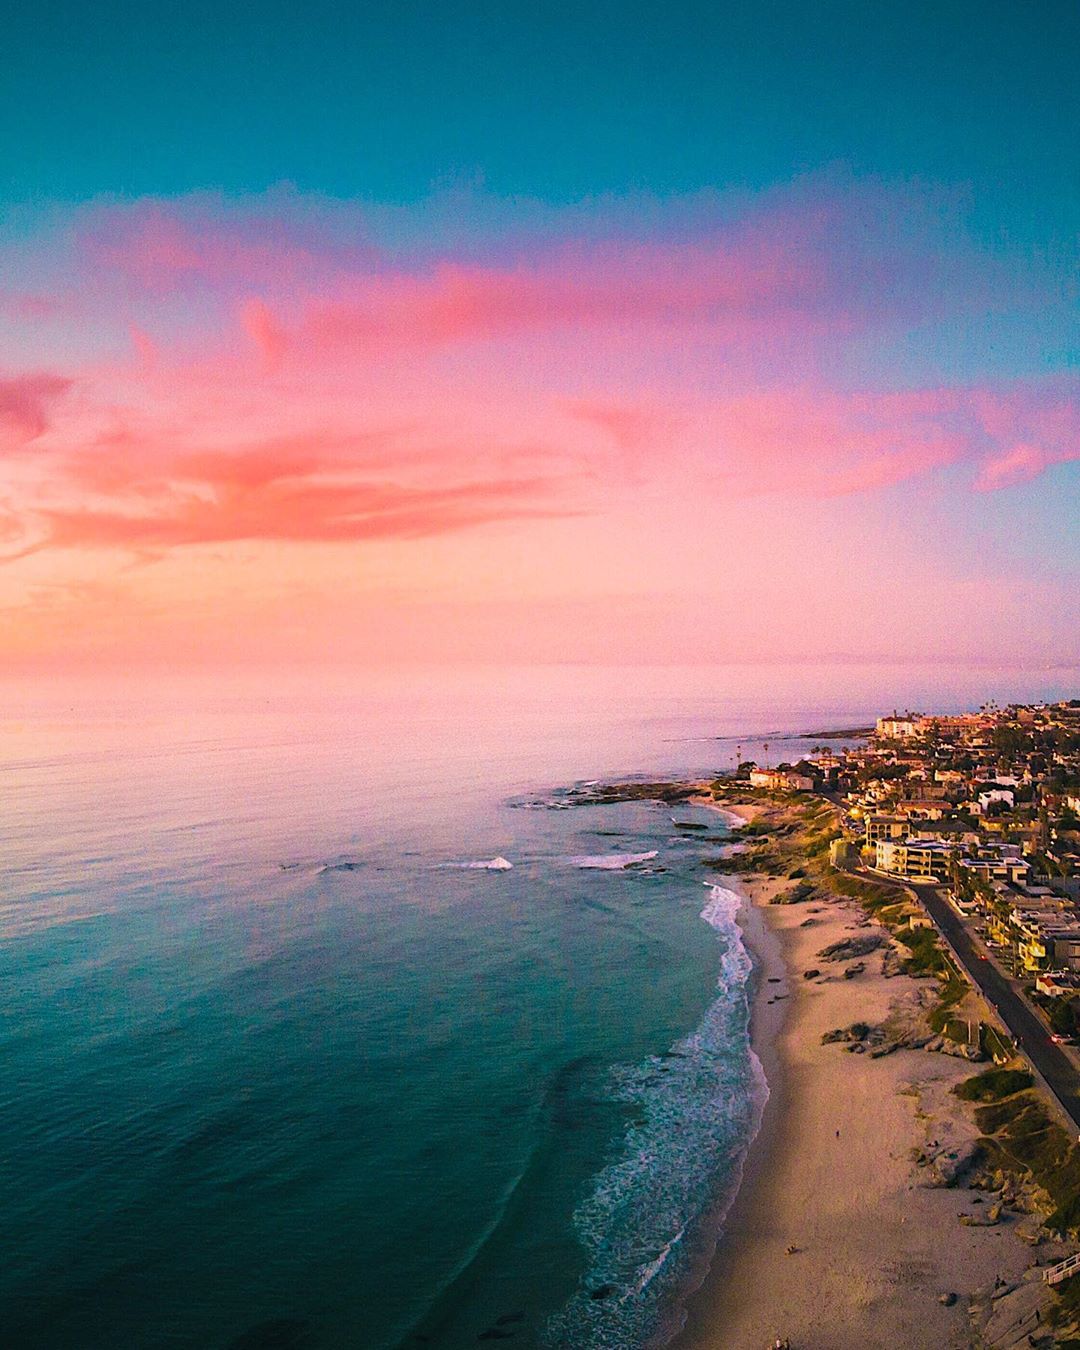 Coastal View at Sunset of San Diego, CA. Photo by Instagram user @lifewithkahlil